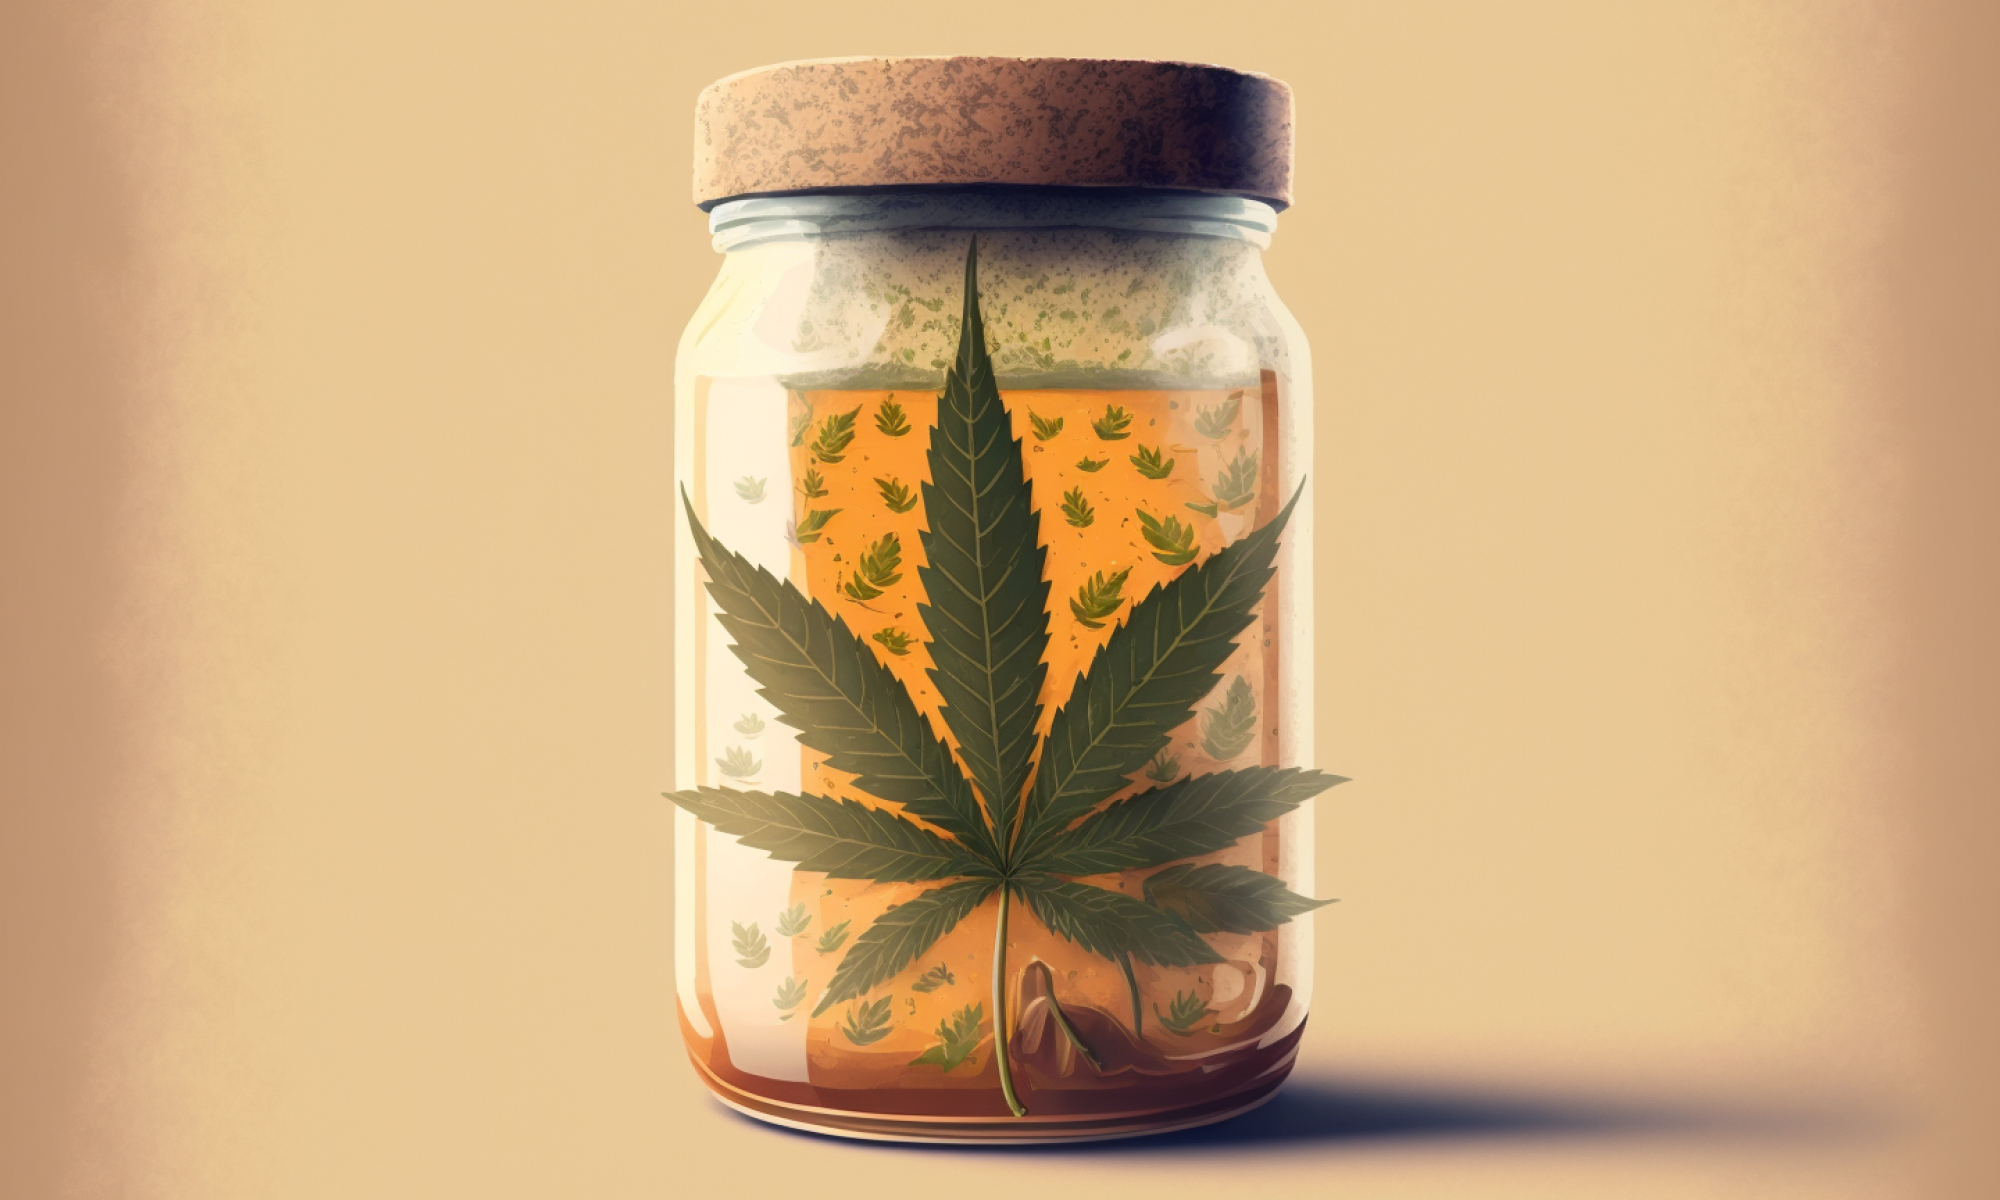 Illustration of a glass jar filled with yeast with a marijuana leaf at front like a sticker.